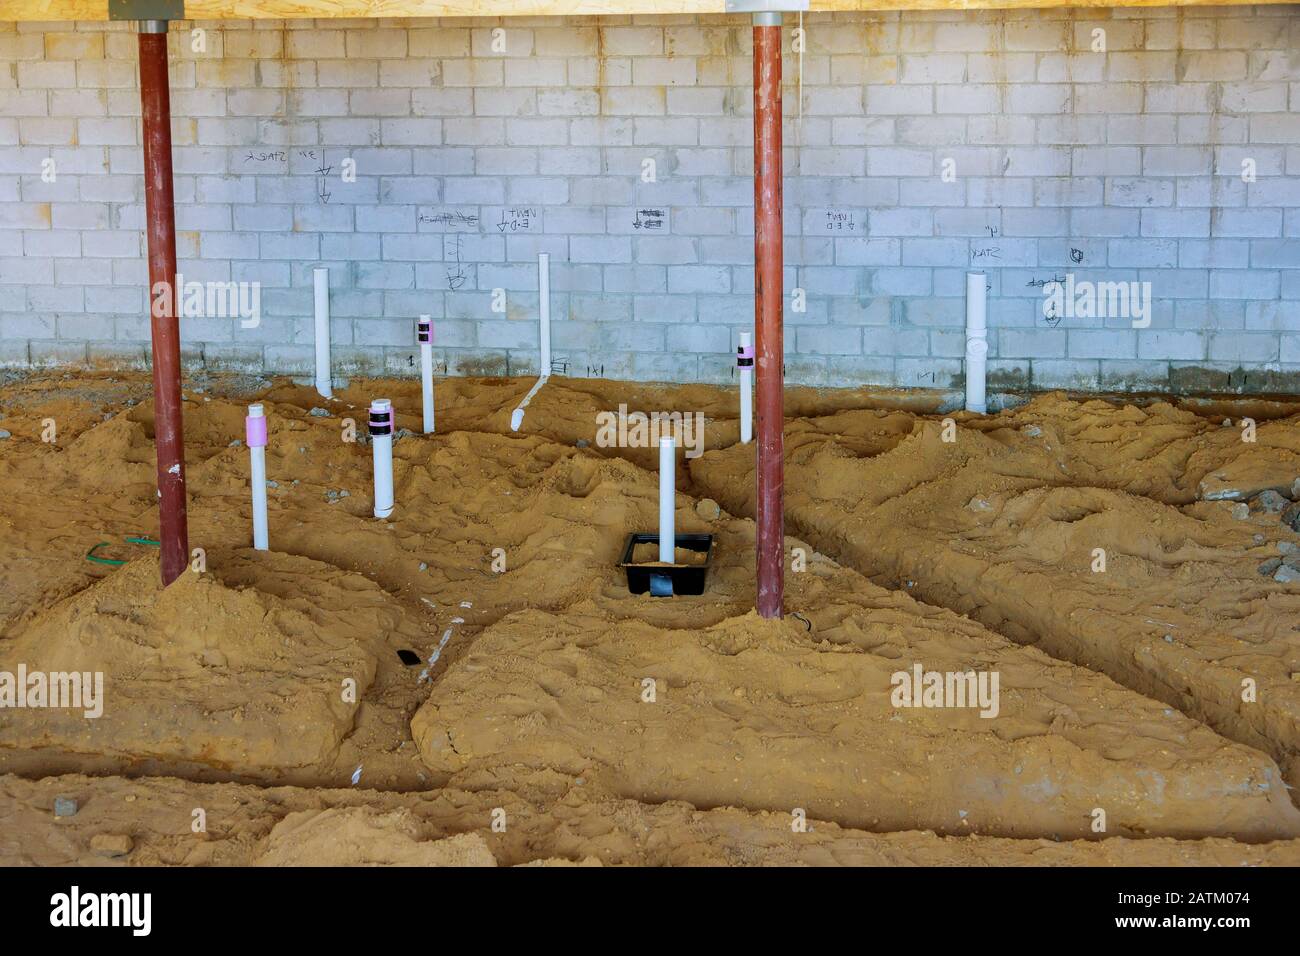 Pex And Drain Sewer Pipes In Home Basement Assembling System Of Sanitary Pipes In The Ground Stock Photo Alamy